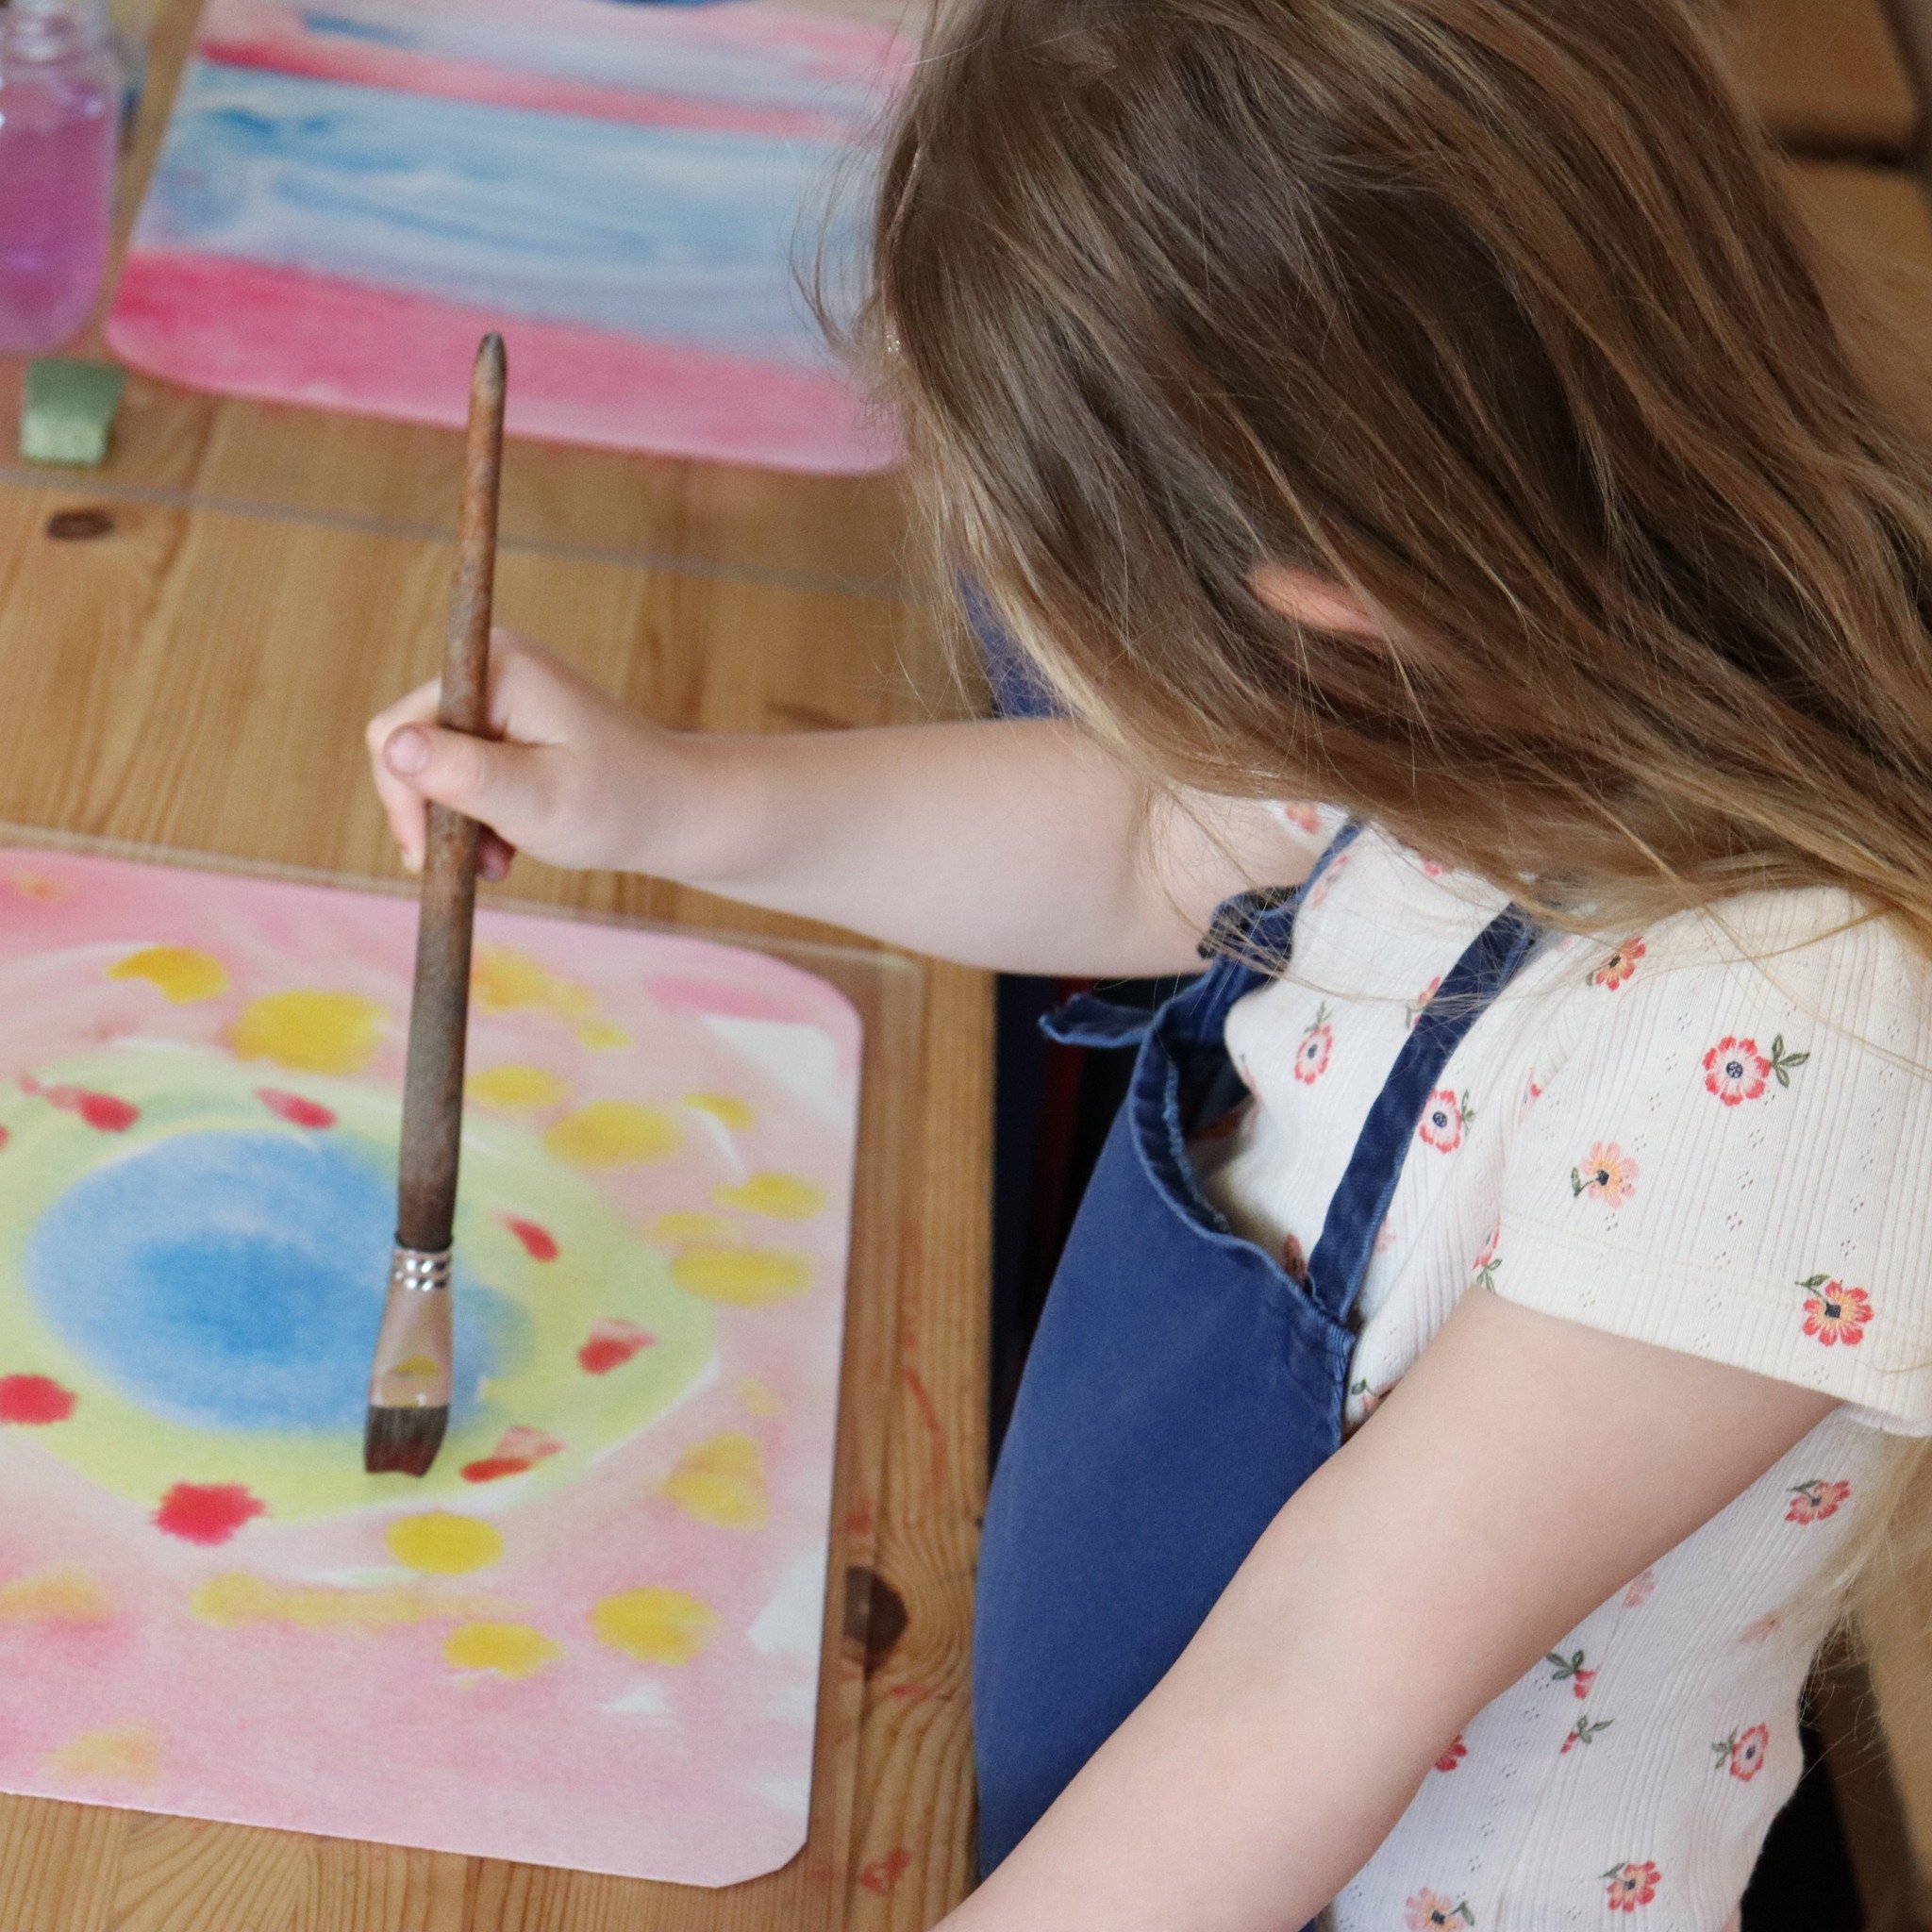 The kinderwing is alive with activity, but unhurried as children follow the rhythms of the days and seasons &mdash; this is an integral part of early learning and growth. Watercolour painting, beeswax modelling, crafts, daily chores, and baking all h